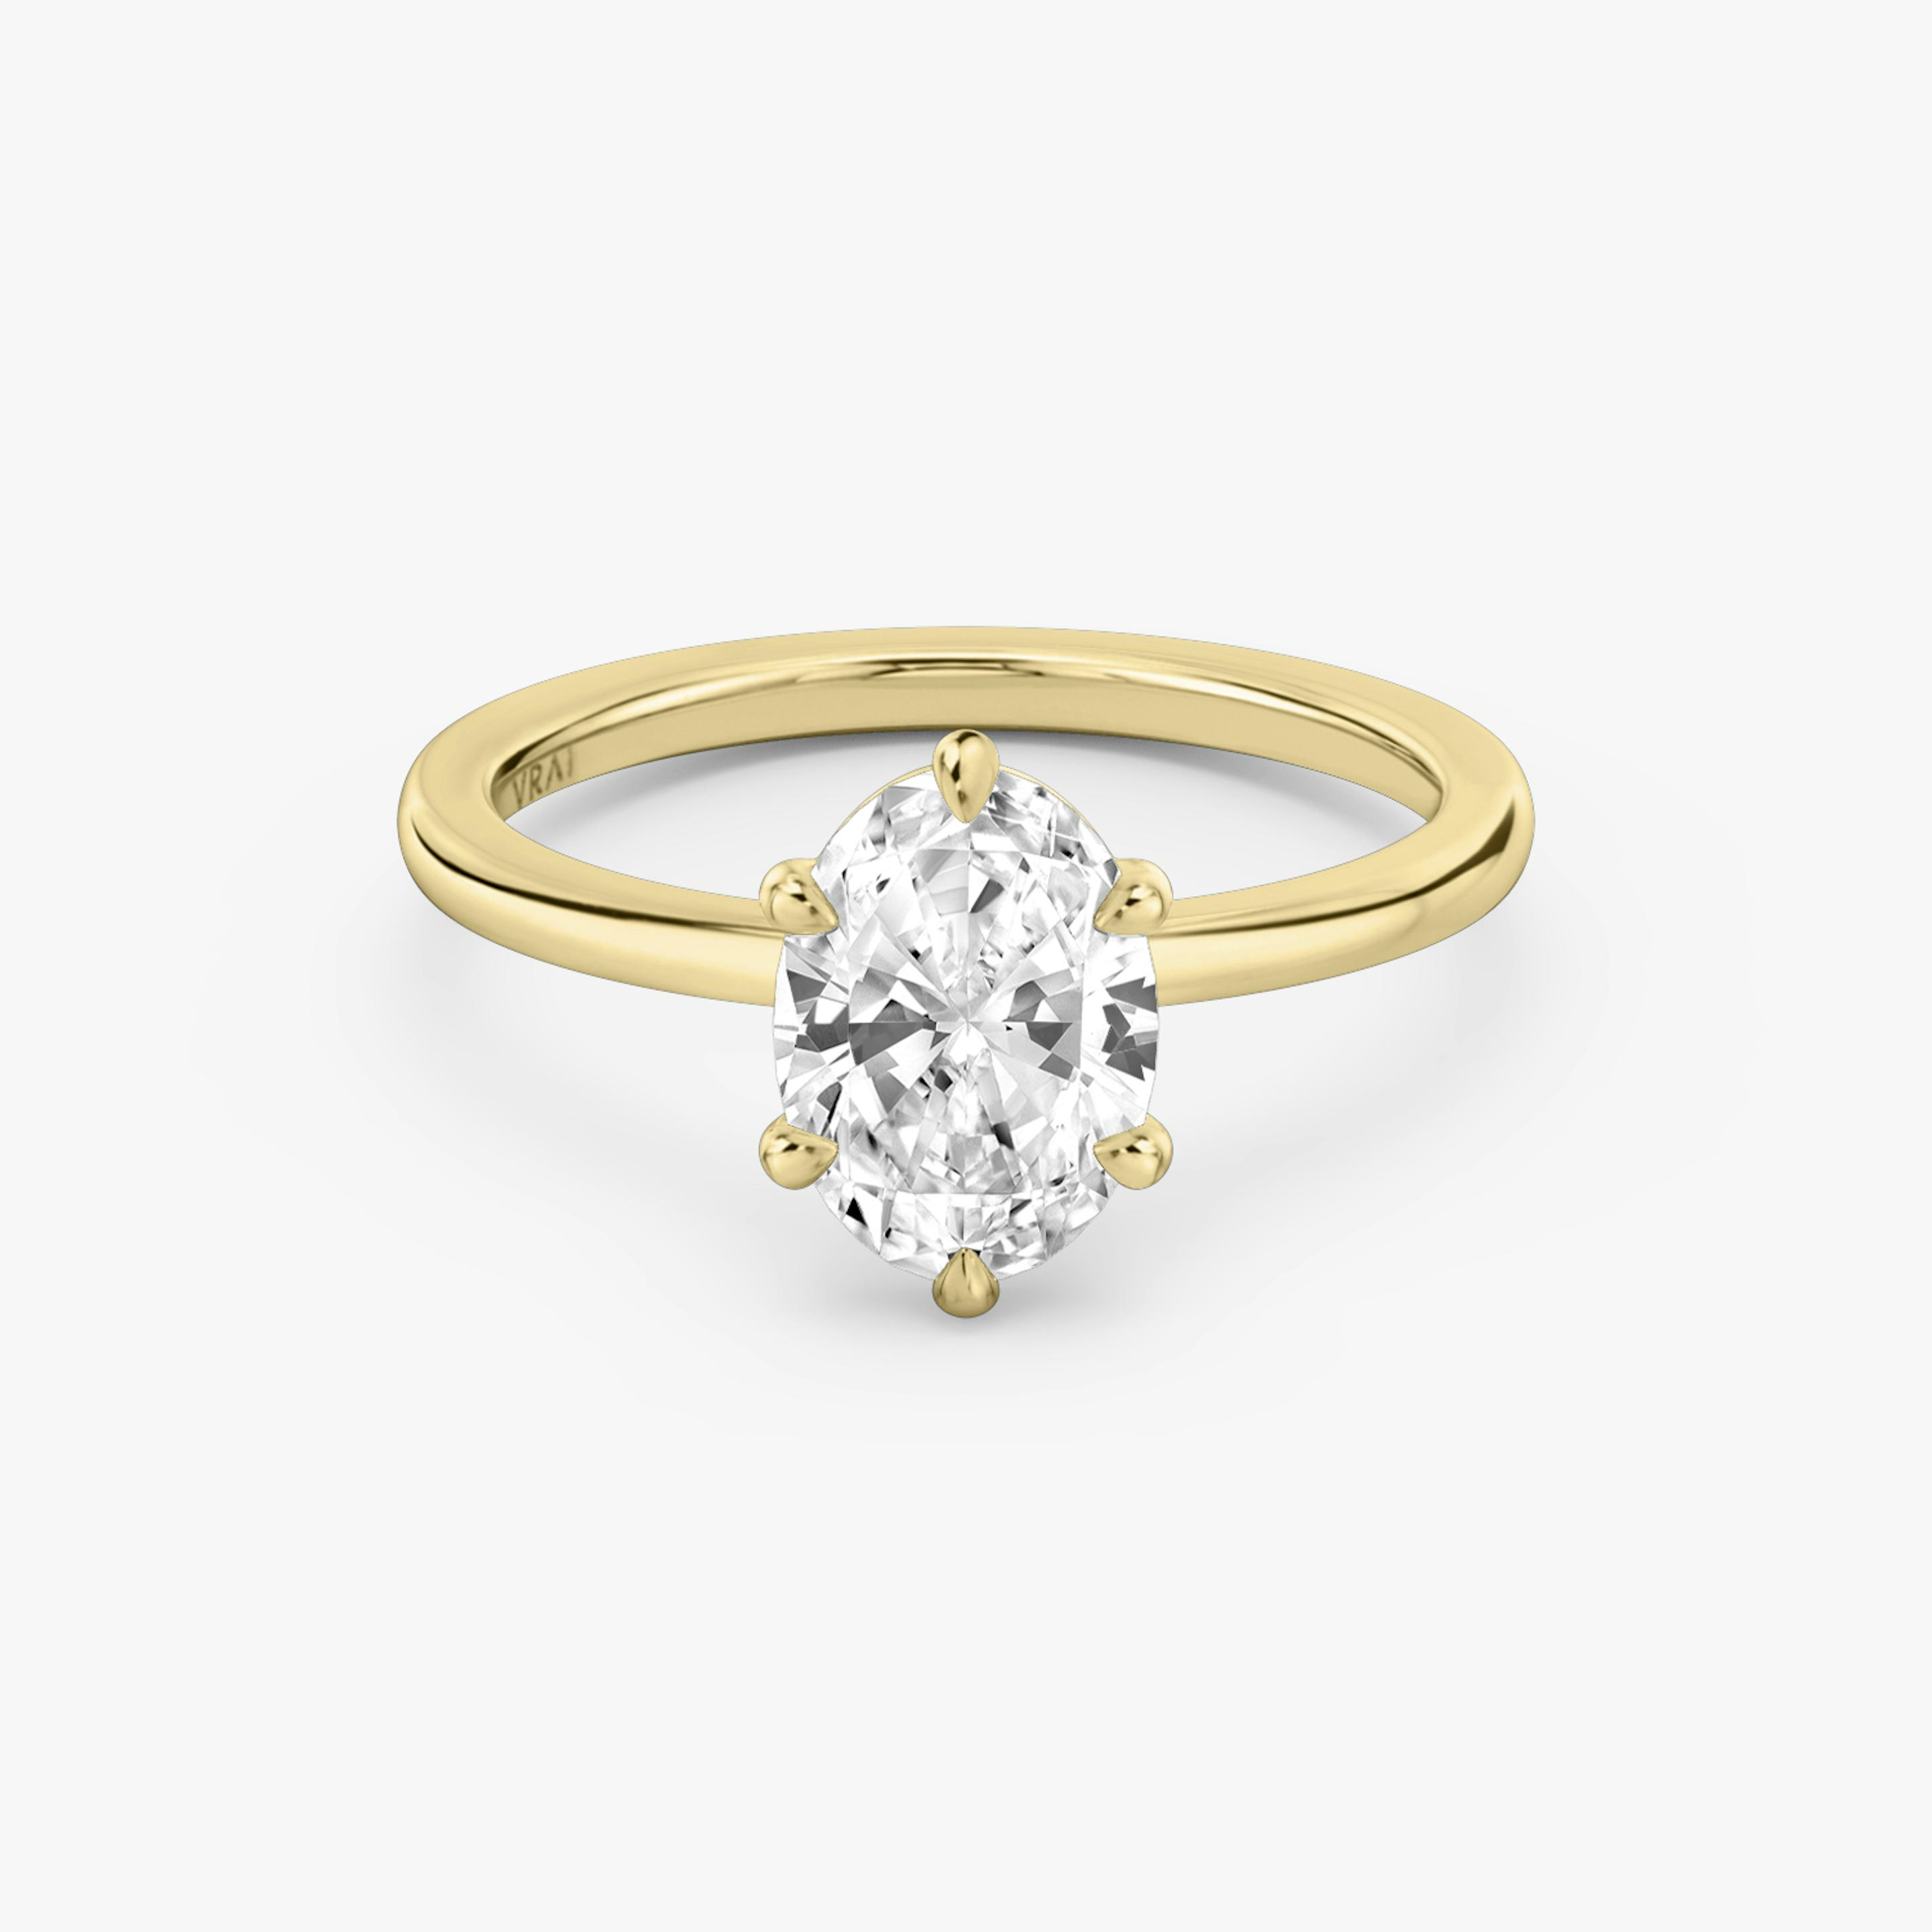 The Signature Oval Engagement Ring